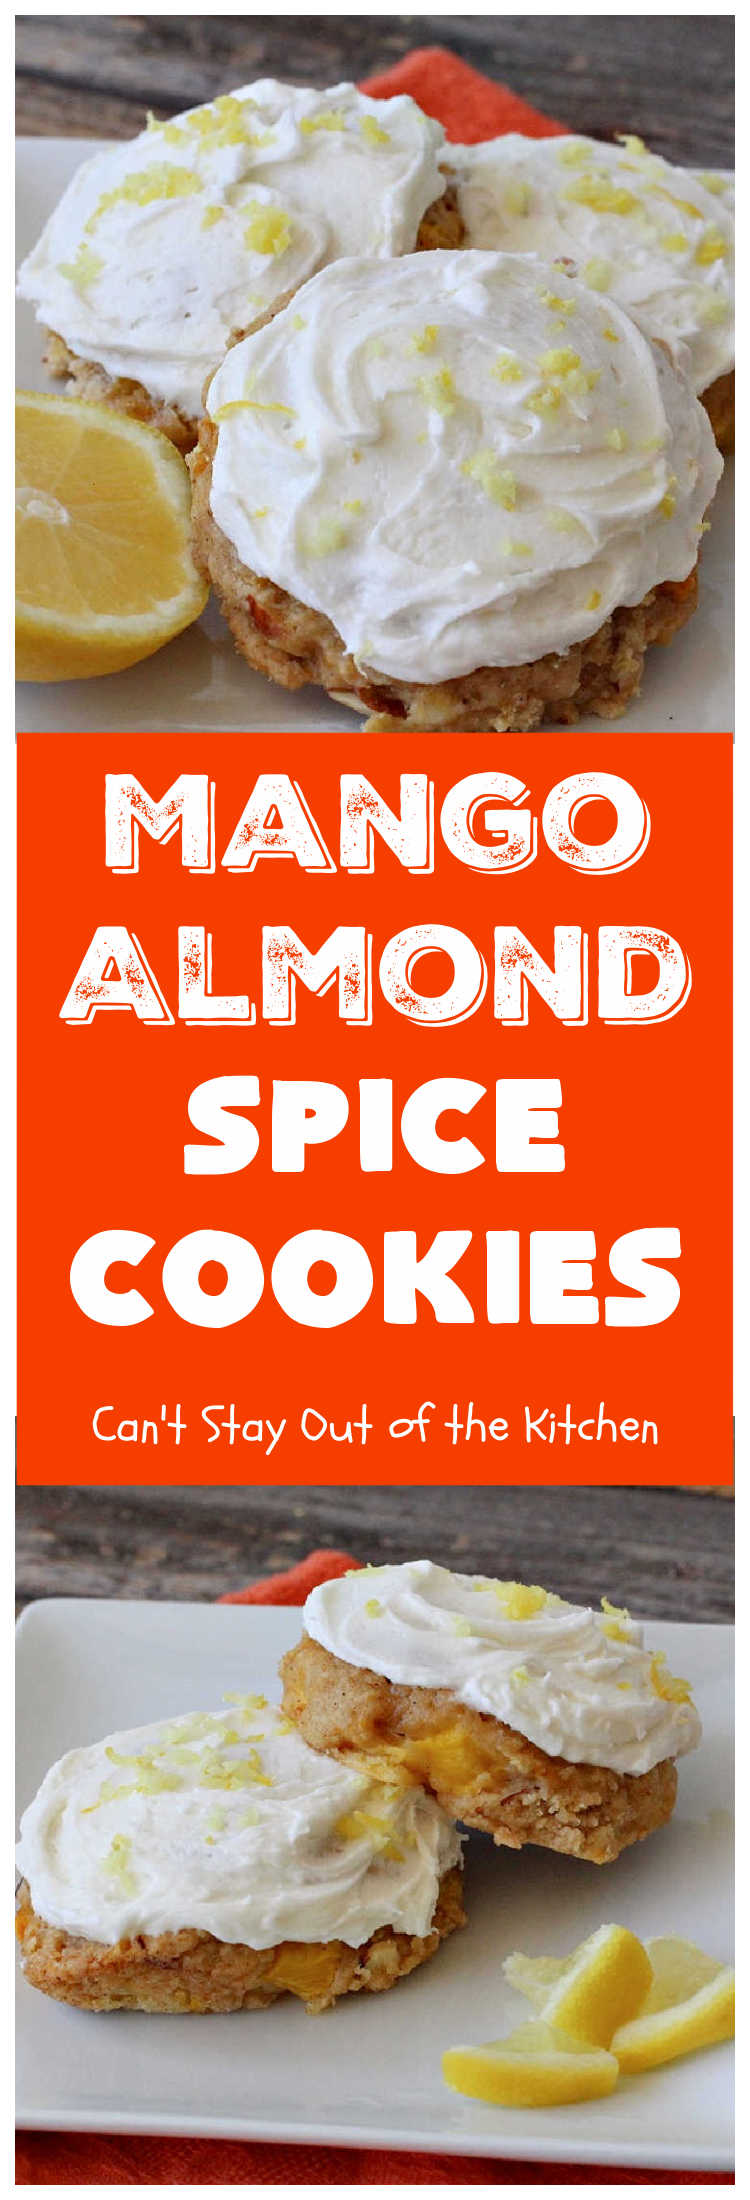 Mango Almond Spice Cookies | Can't Stay Out of the Kitchen | these amazing #cookies are heavenly. The #Lemon Buttercream Frosting is divine. Perfect for summer holidays, backyard barbecues & potlucks. Will certainly cure any sweet tooth craving! #dessert #mangos #almonds #MangoDessert #MangoAlmondSpiceCookies